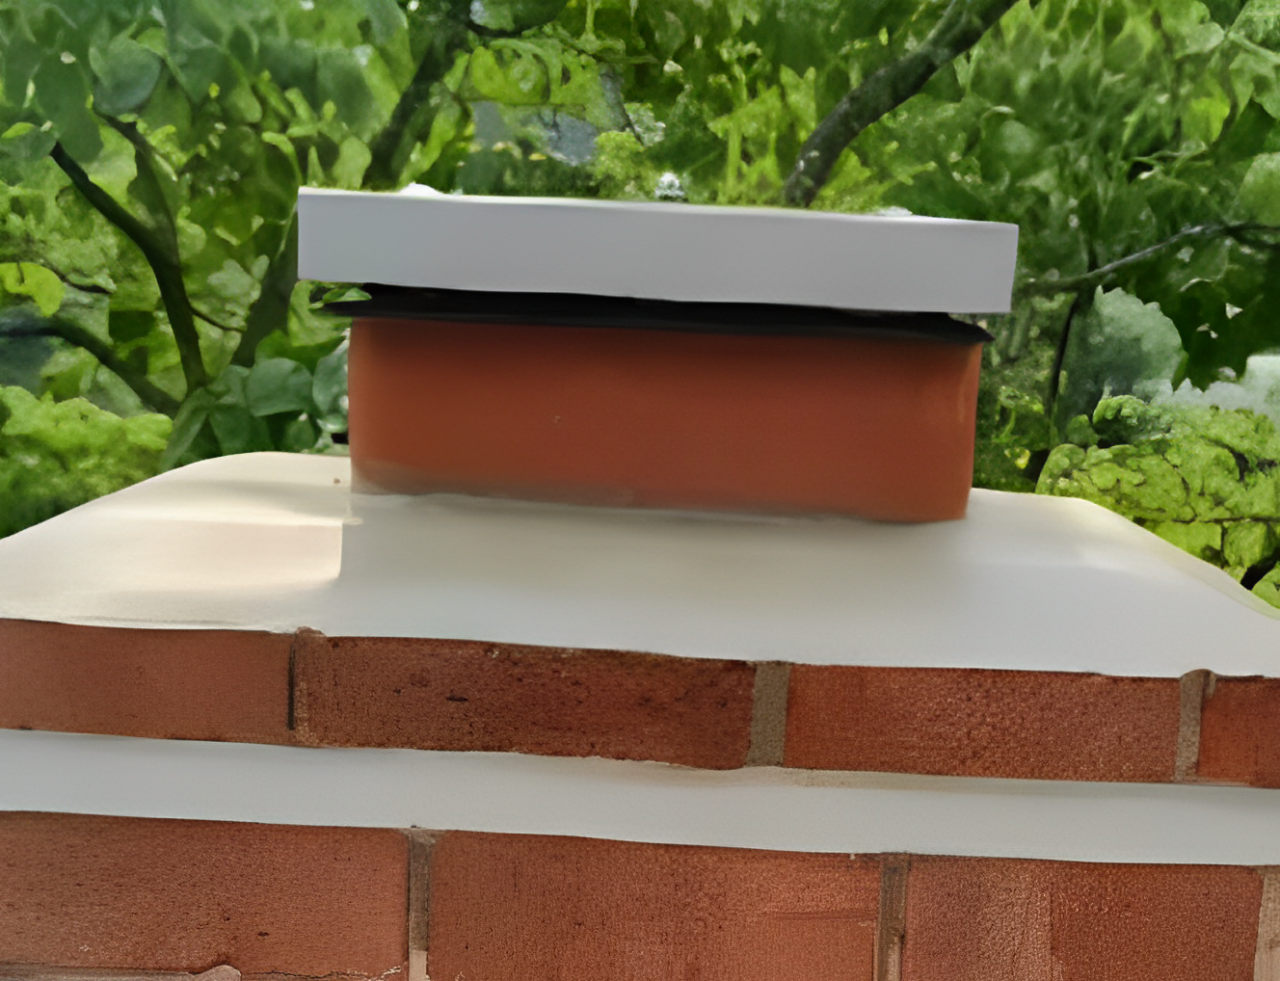 A brick chimney with a box on top of it.